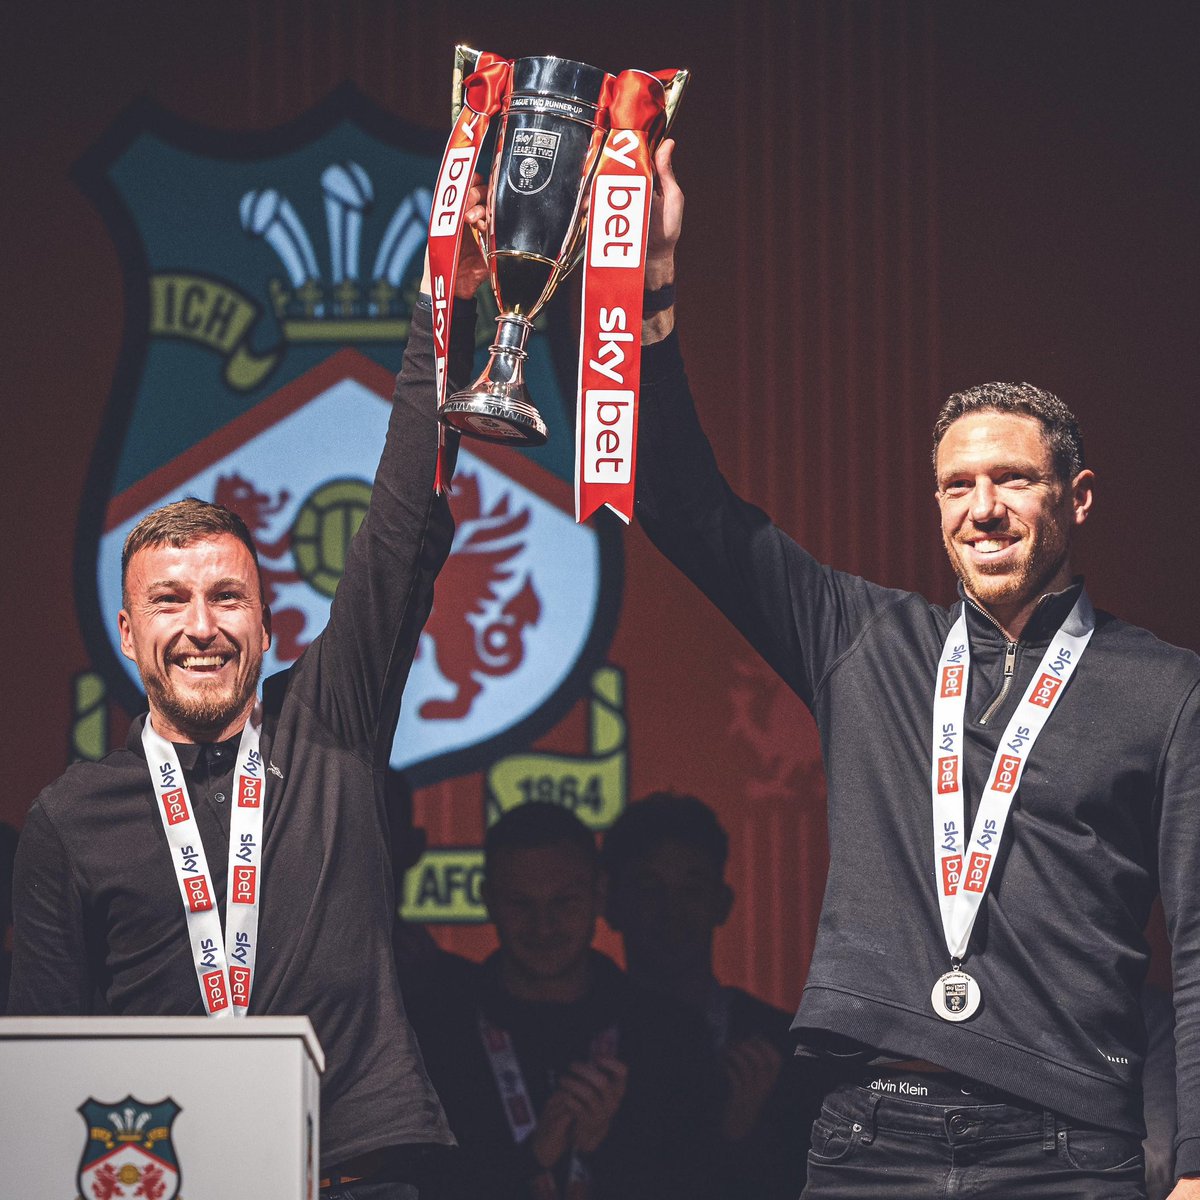 Wrexham AFC 2023/24 Season Recap

Mens
 
League: 2nd 🥈🆙 
FA Cup: 4th Round 
EFL Cup: 2nd Round 
EFL Trophy: Last 16

Womens

League: 3rd 🥉 
FAW Cup: Runners Up
Adran Trophy: Q-F

Youth 

League: 2nd 🥈 
FAW Cup: 1st Round 
FA Youth Cup: 1st Round 

Excellent Season All Round